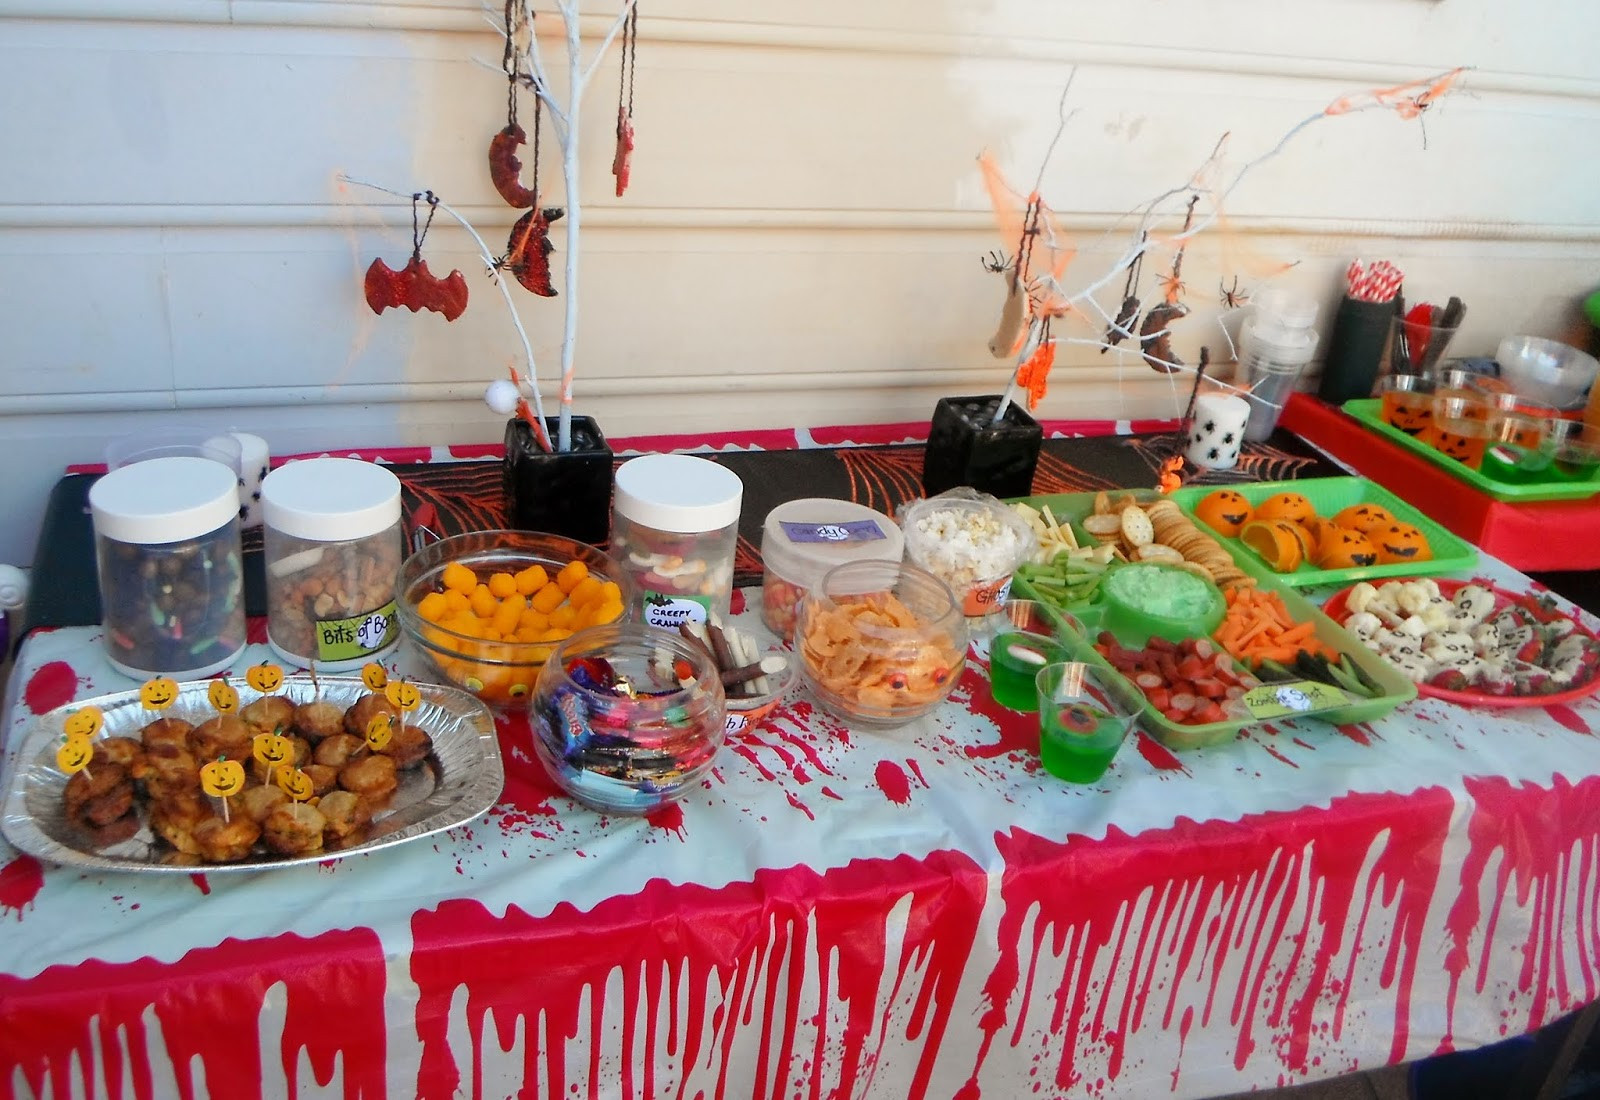 Halloween Food Ideas For Kids Party
 Adventures at home with Mum Halloween Party Food